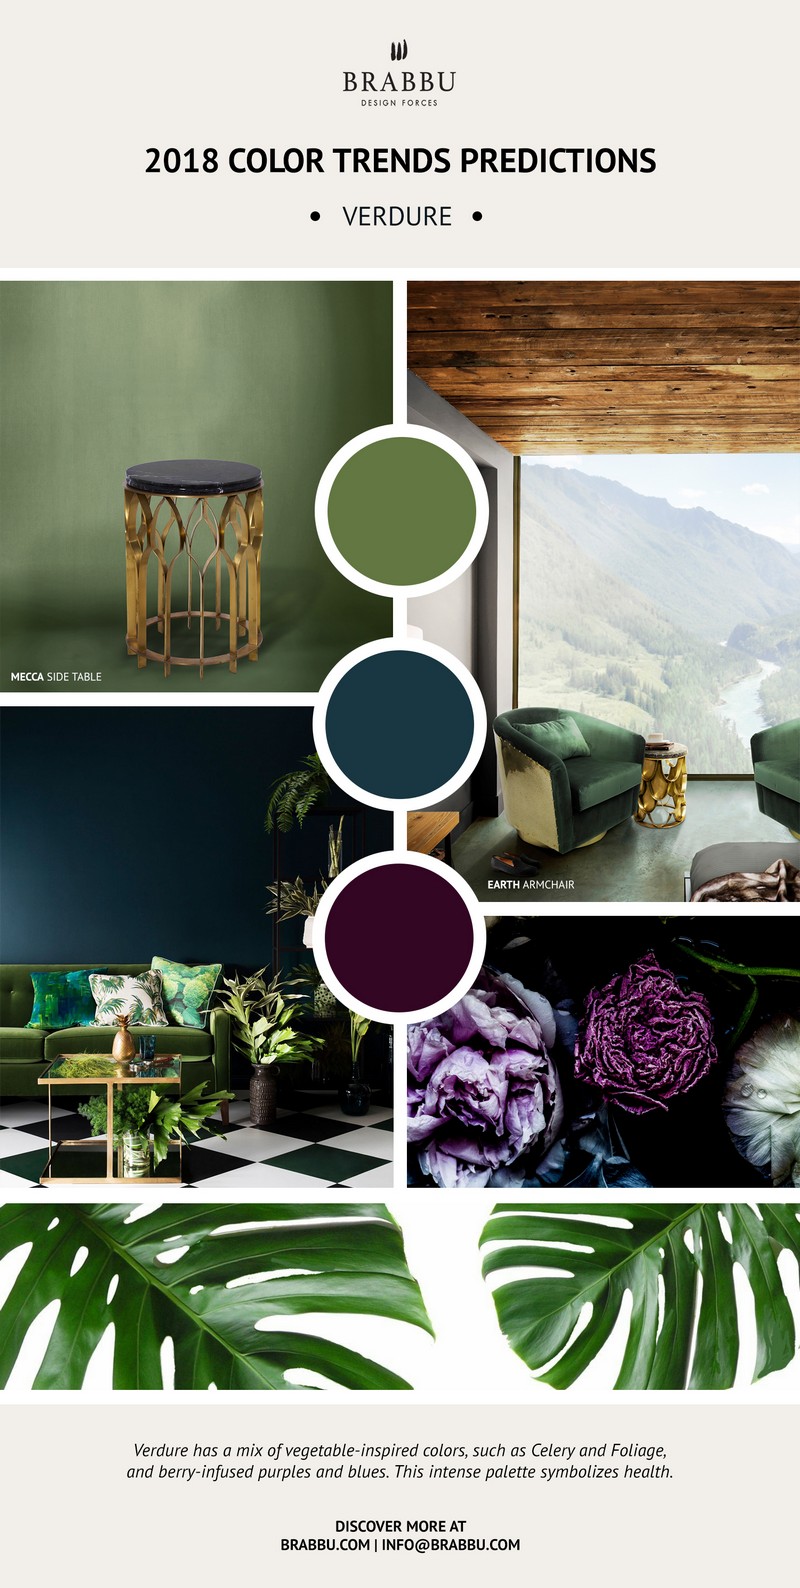 Interior Design Tips: The Pantone’s Color Predictions for 2018 > Best Design Guides > The Latest news on the design world > #pantonecolors #interiordesign #bestdesignguides